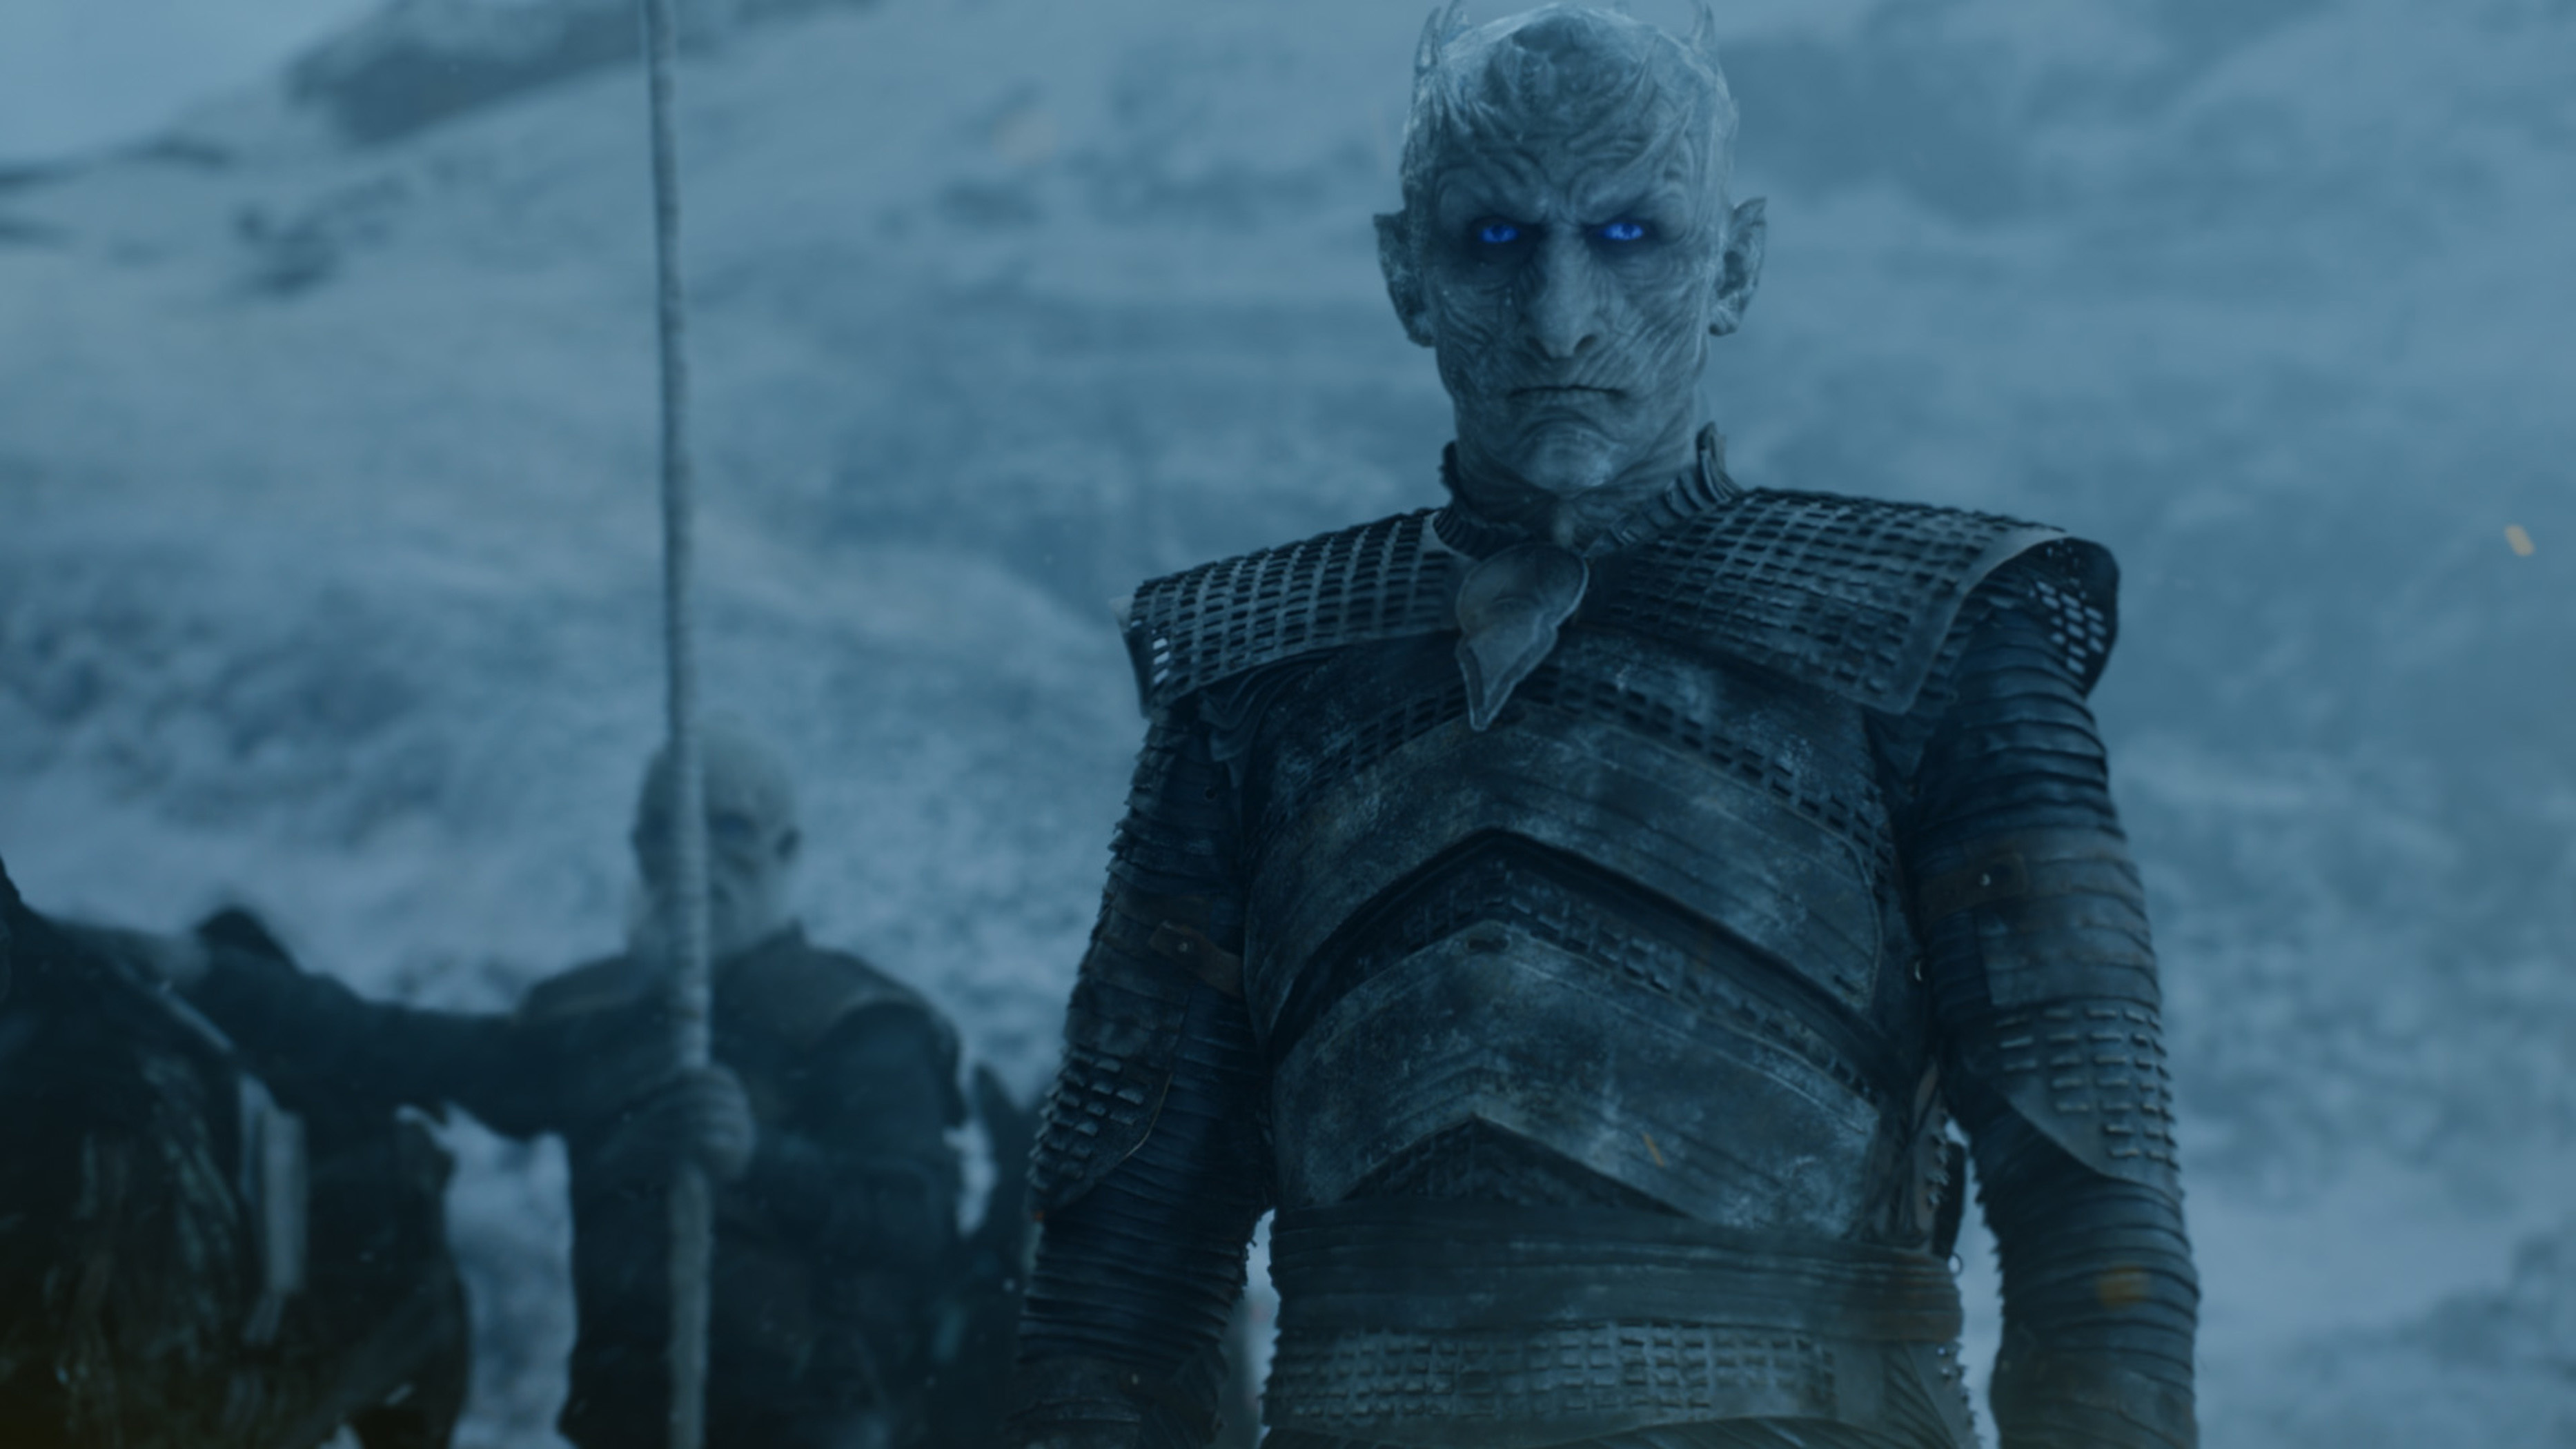 Game of Thrones season 8 episode 3 going to feature the most epic battle sequence ever